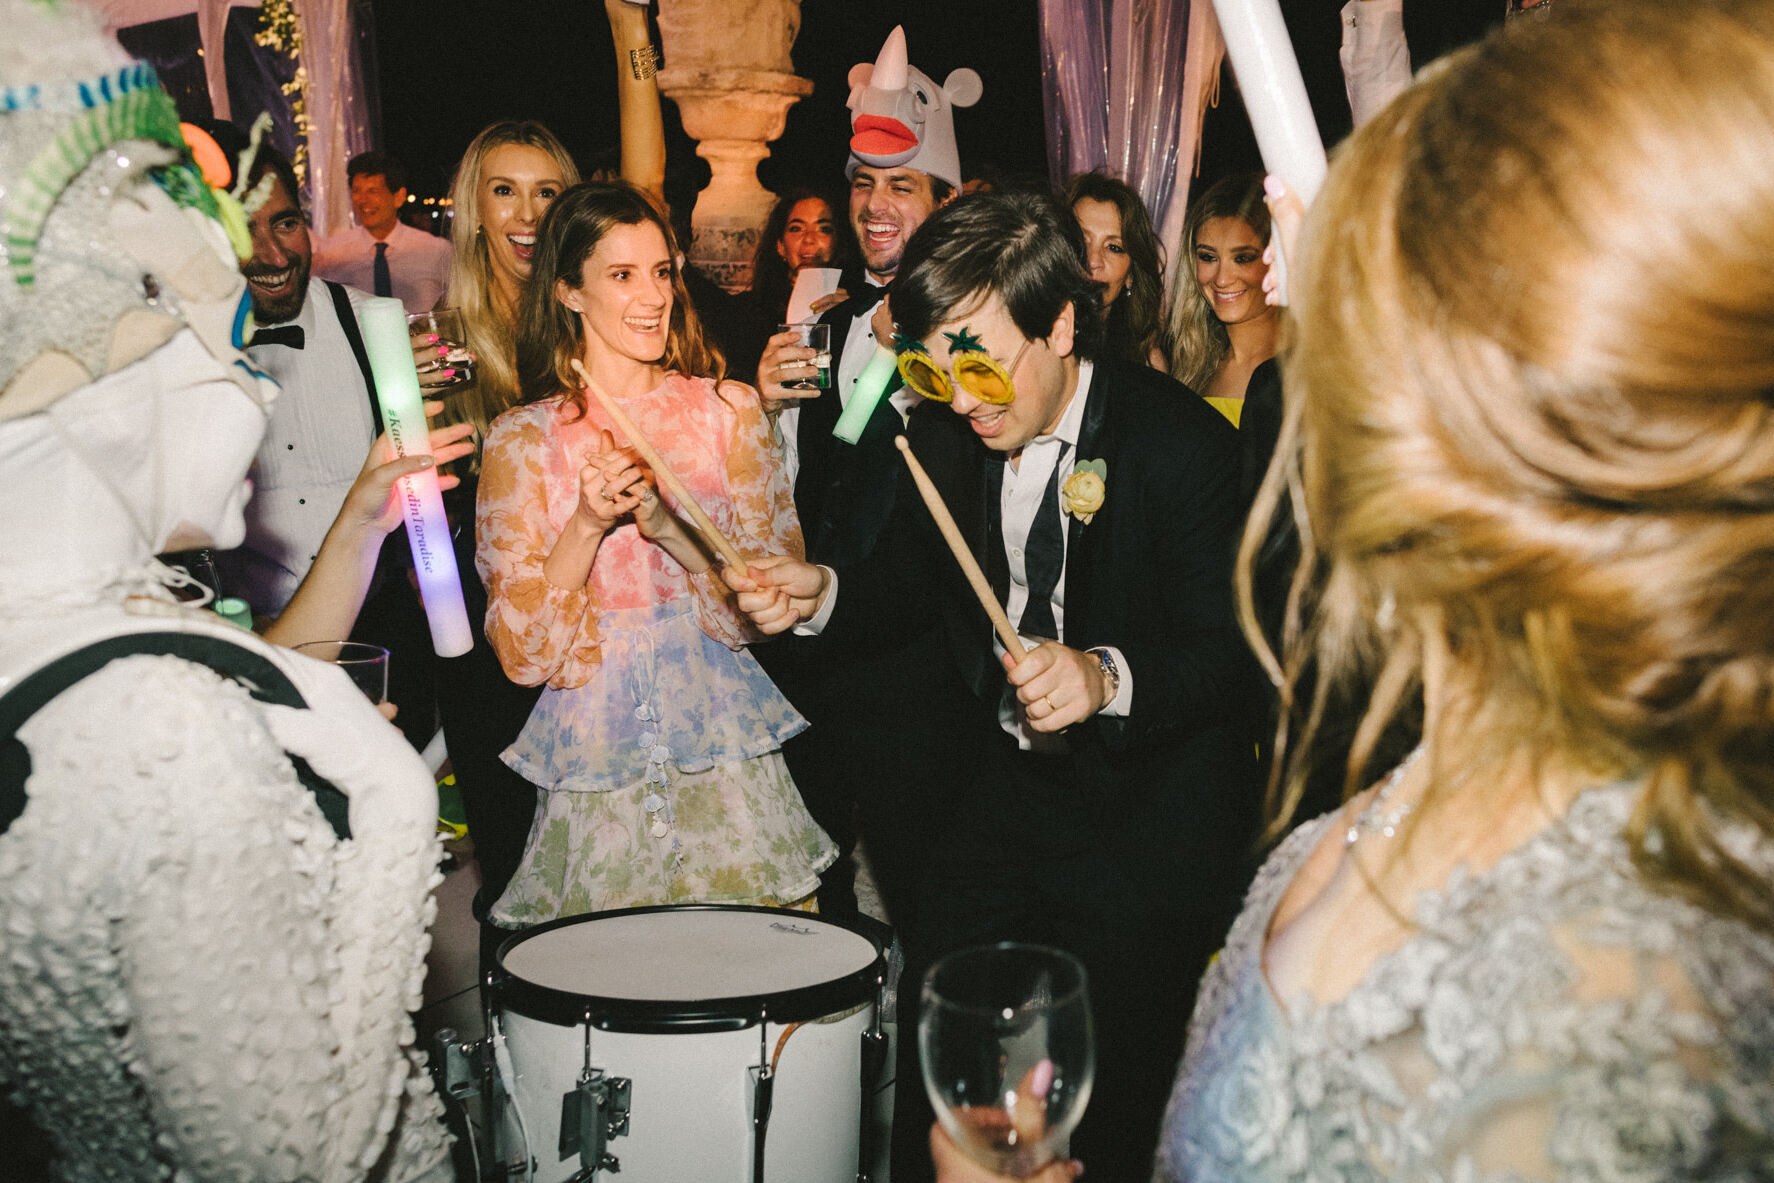 Guests interacted with the entertainers at an hora loca during a glam, garden wedding reception.